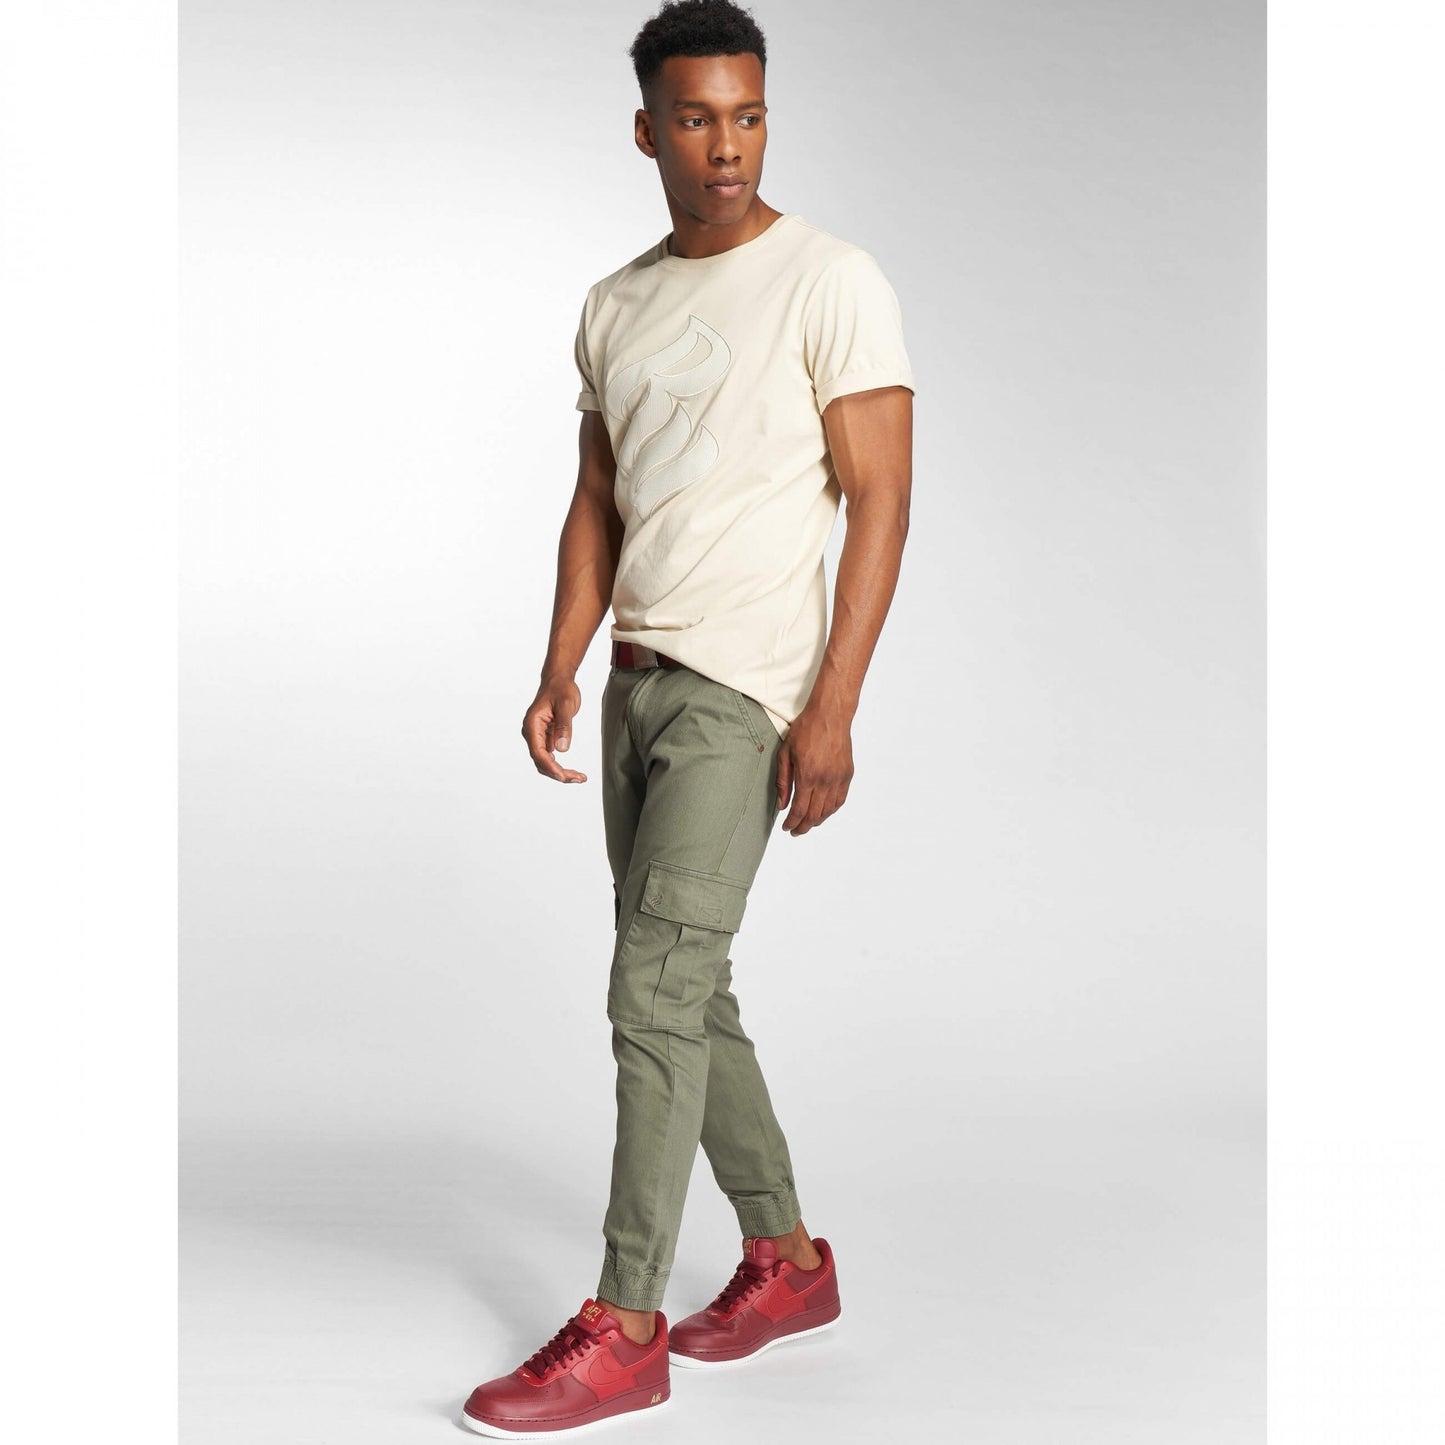 Rocawear Cargo Leatherpatch Olive